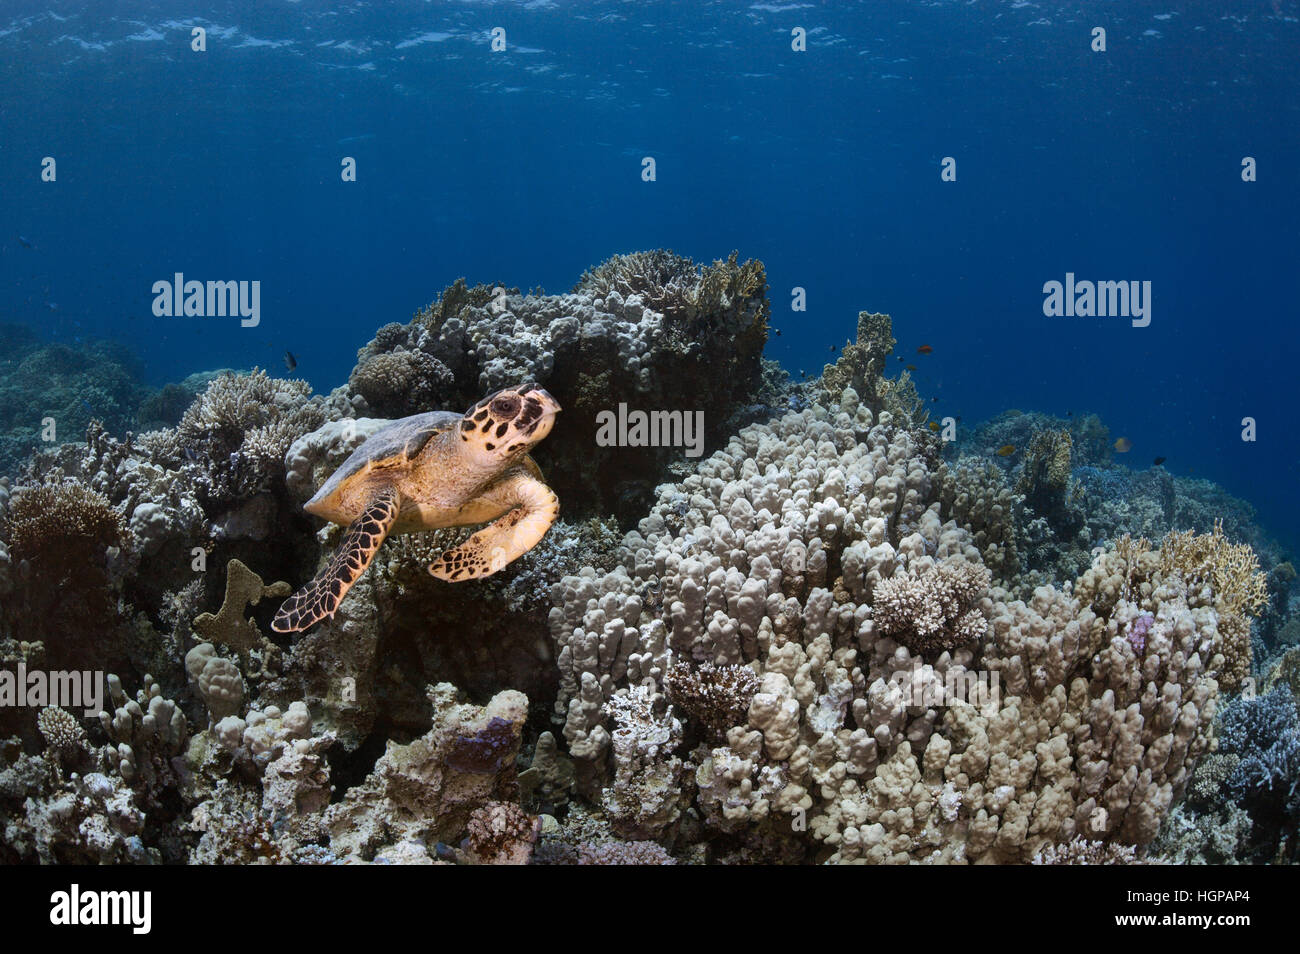 Underwater picture of the Hawksbill sea turtle (Eretmochelys imbricata) swimming above the coral reef in the Red Sea near the shores of Hurghada. Stock Photo